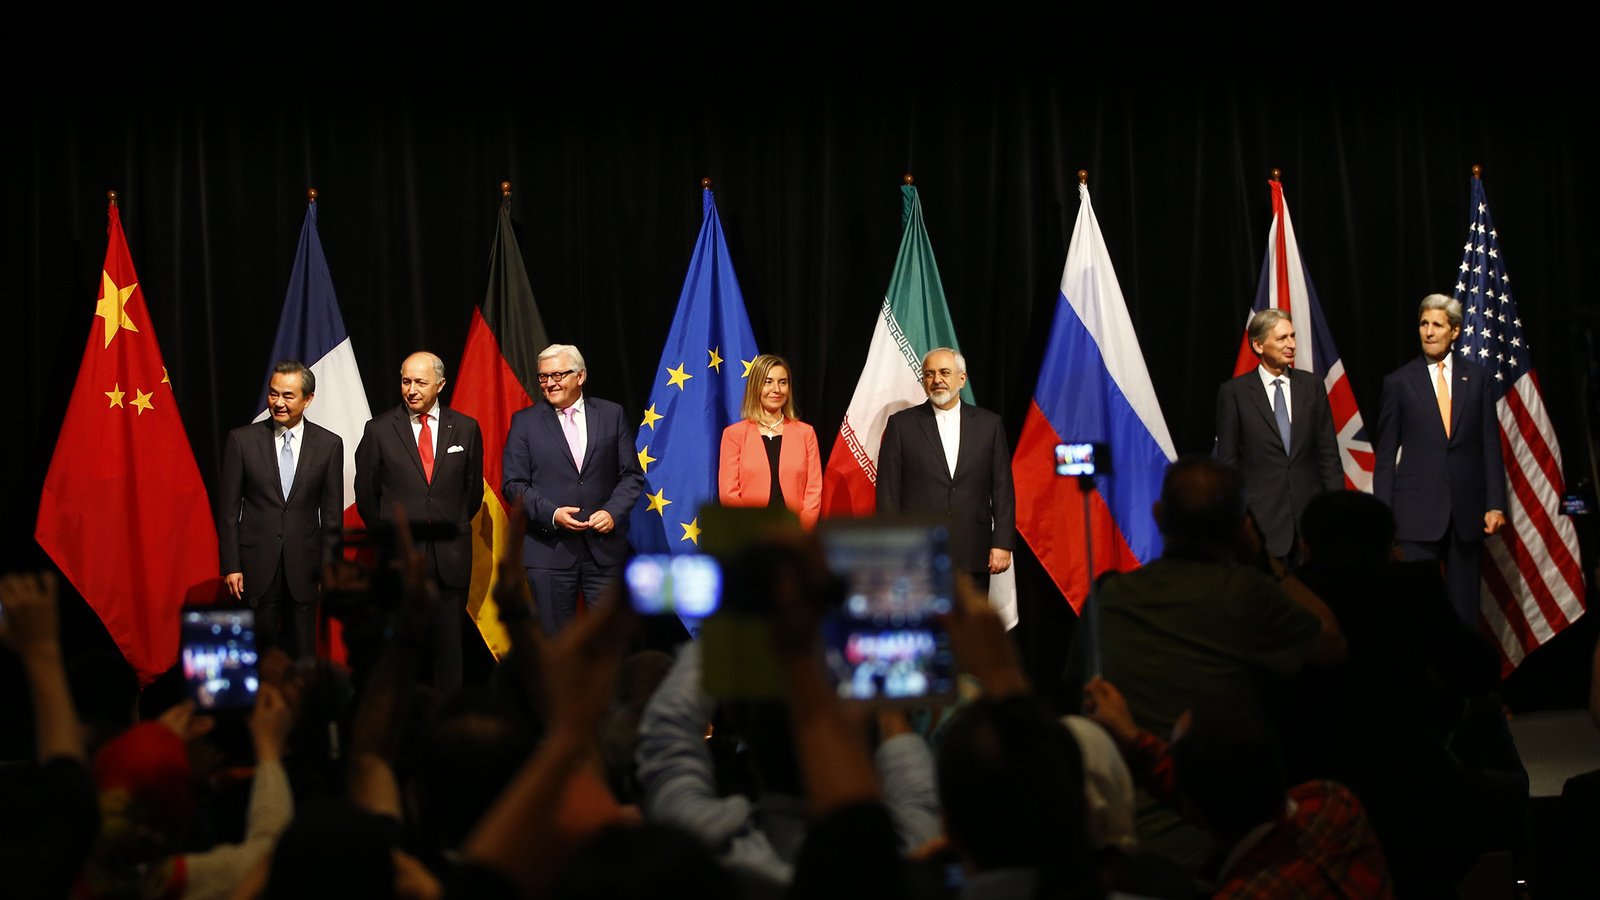 PDF) What a 'New European Security Deal' could mean for the South